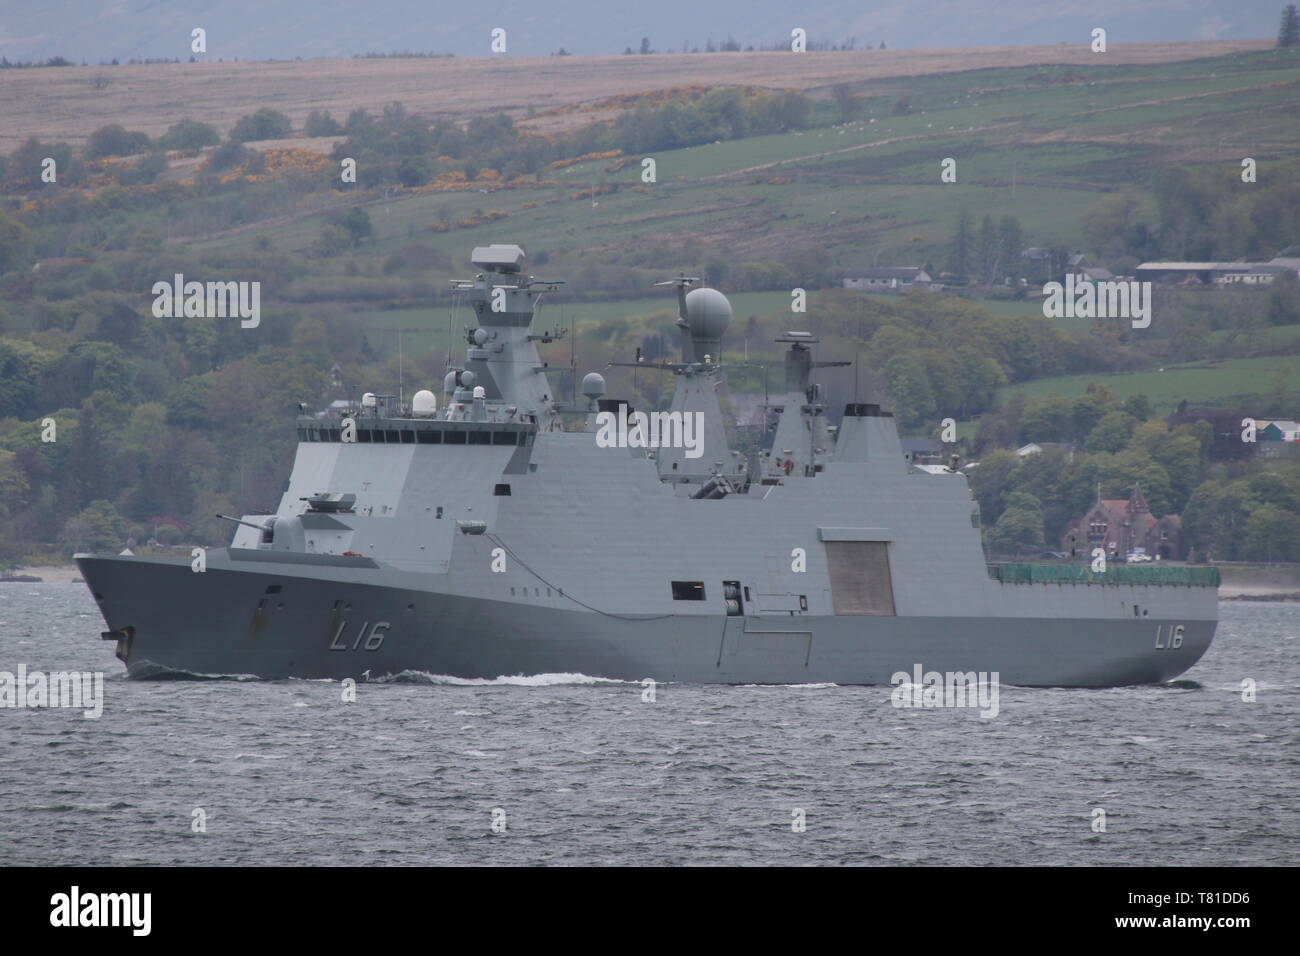 KDM Absalon (L16), an Absalon-class command vessel operated by the Royal Danish Navy, passing Gourock at the start of Exercise Formidable Shield 2019. Stock Photo